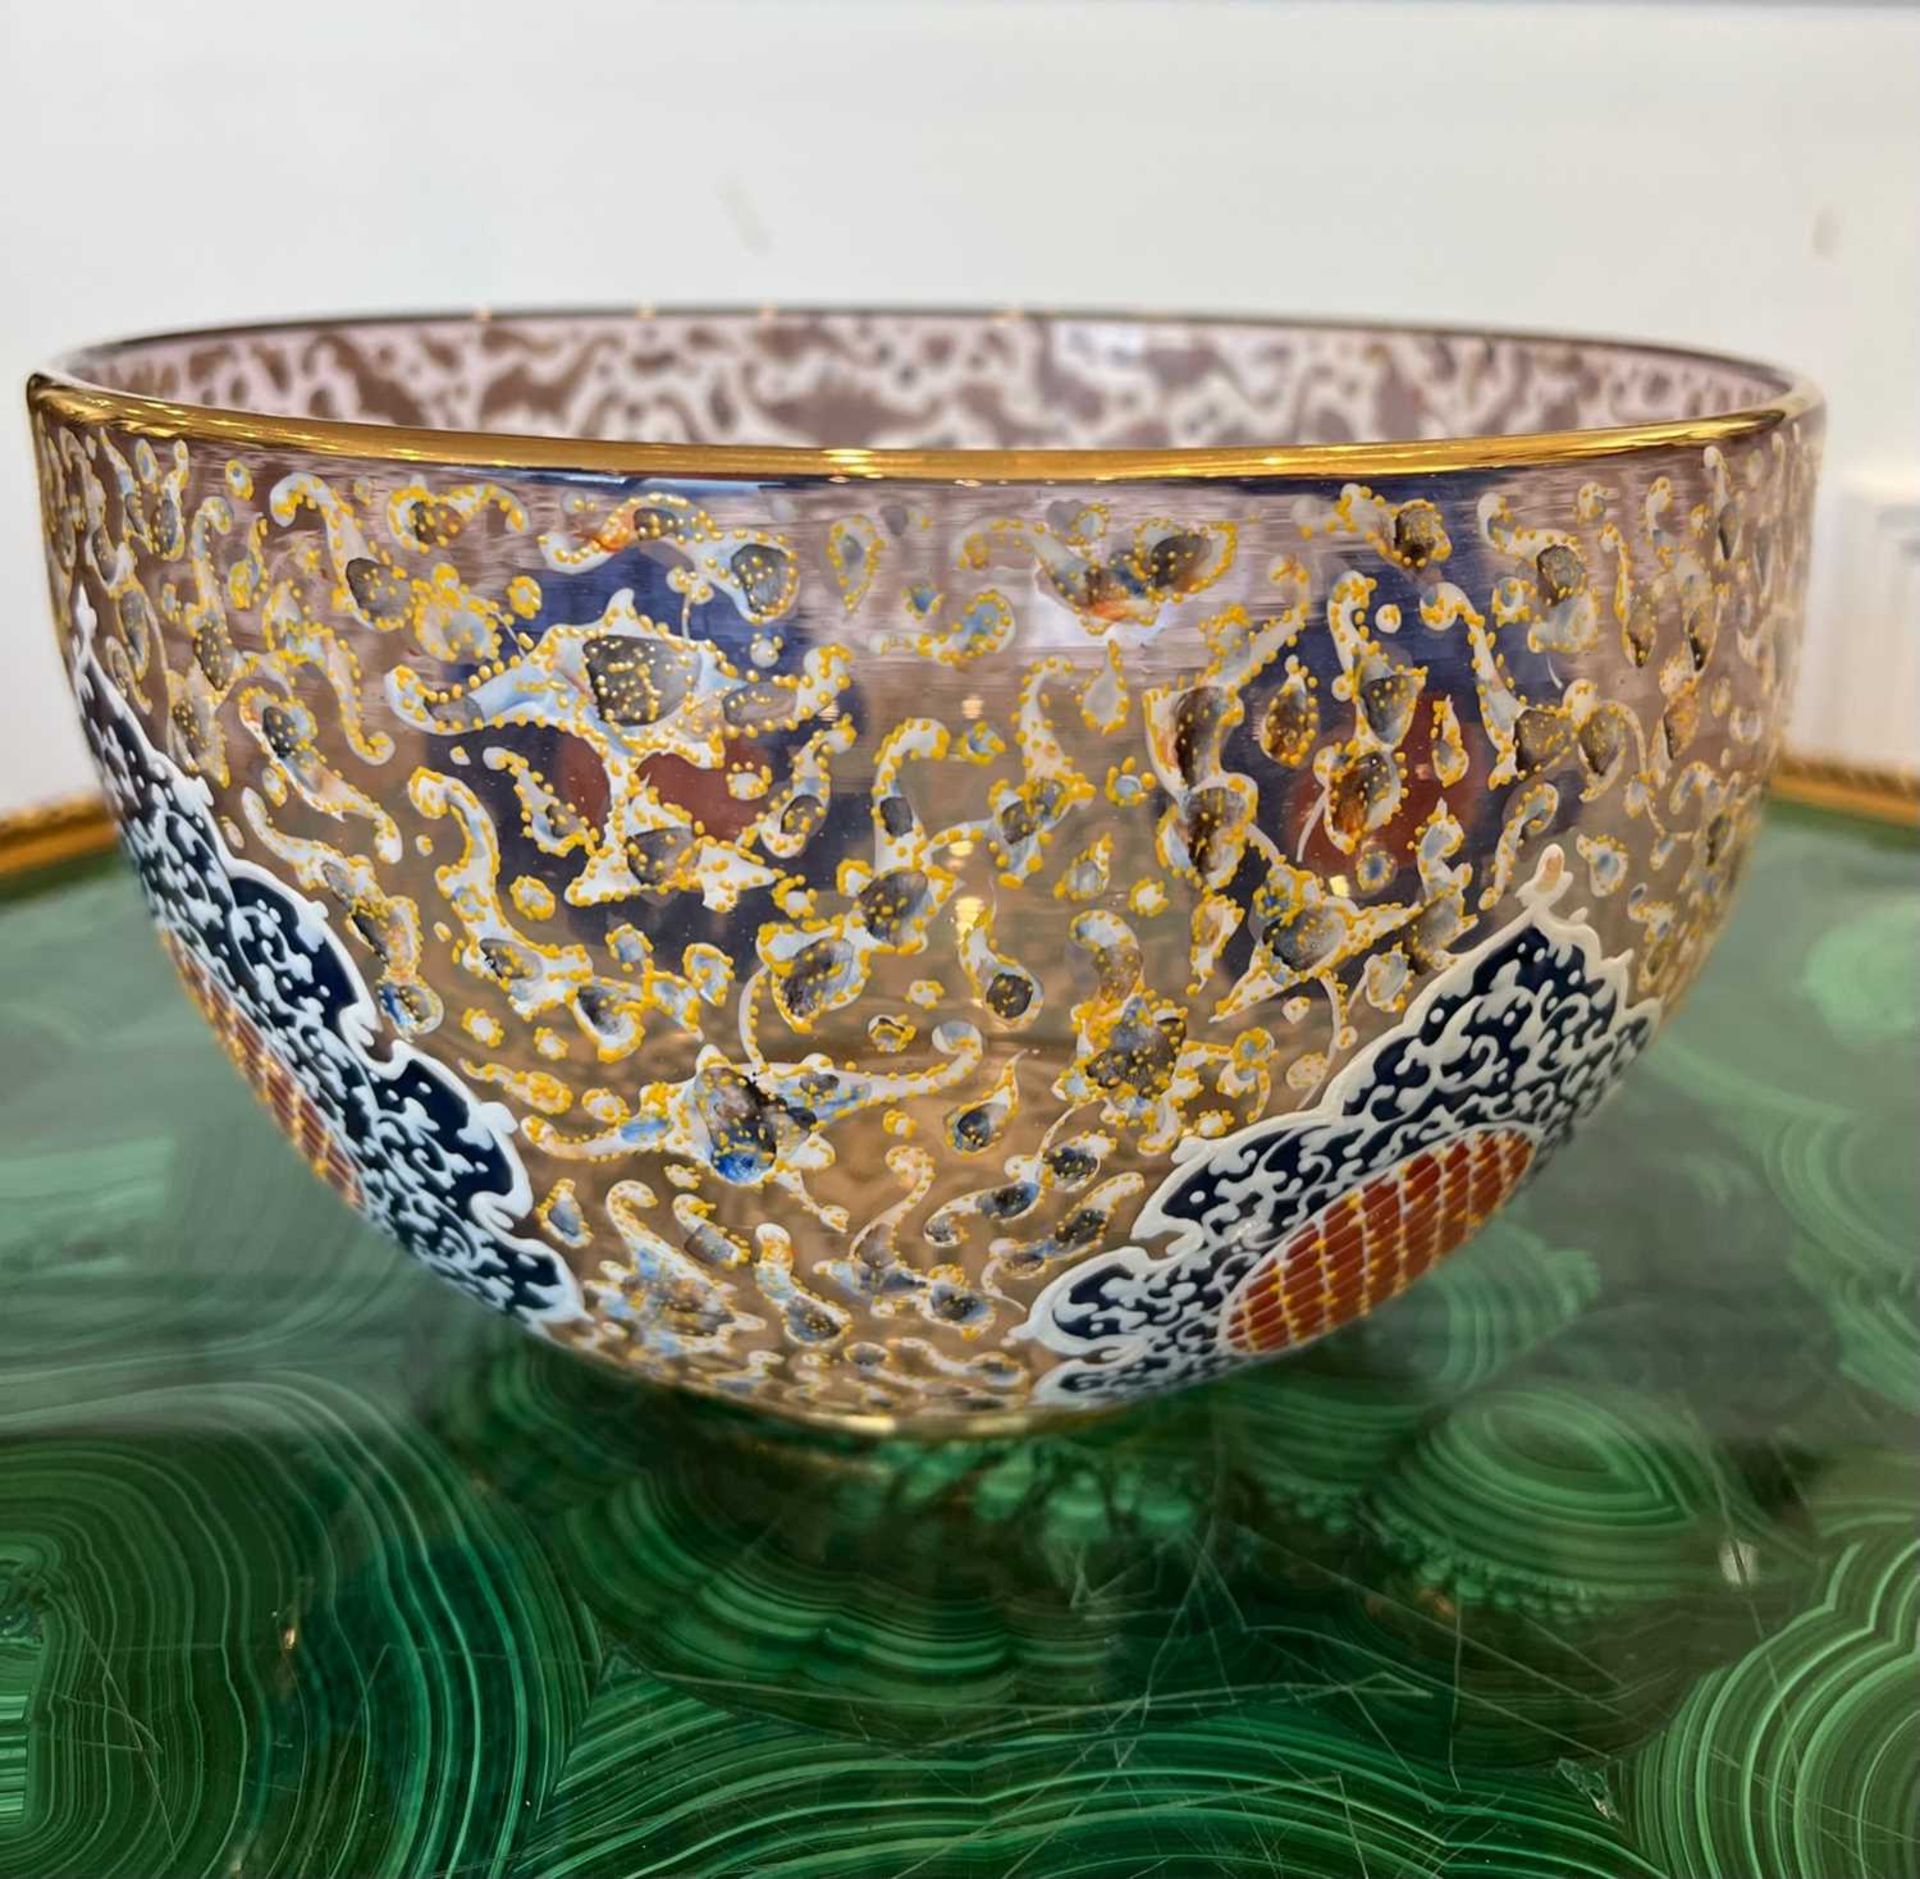 A PERSIAN STYLE ENAMELLED GLASS BOWL - Image 7 of 7